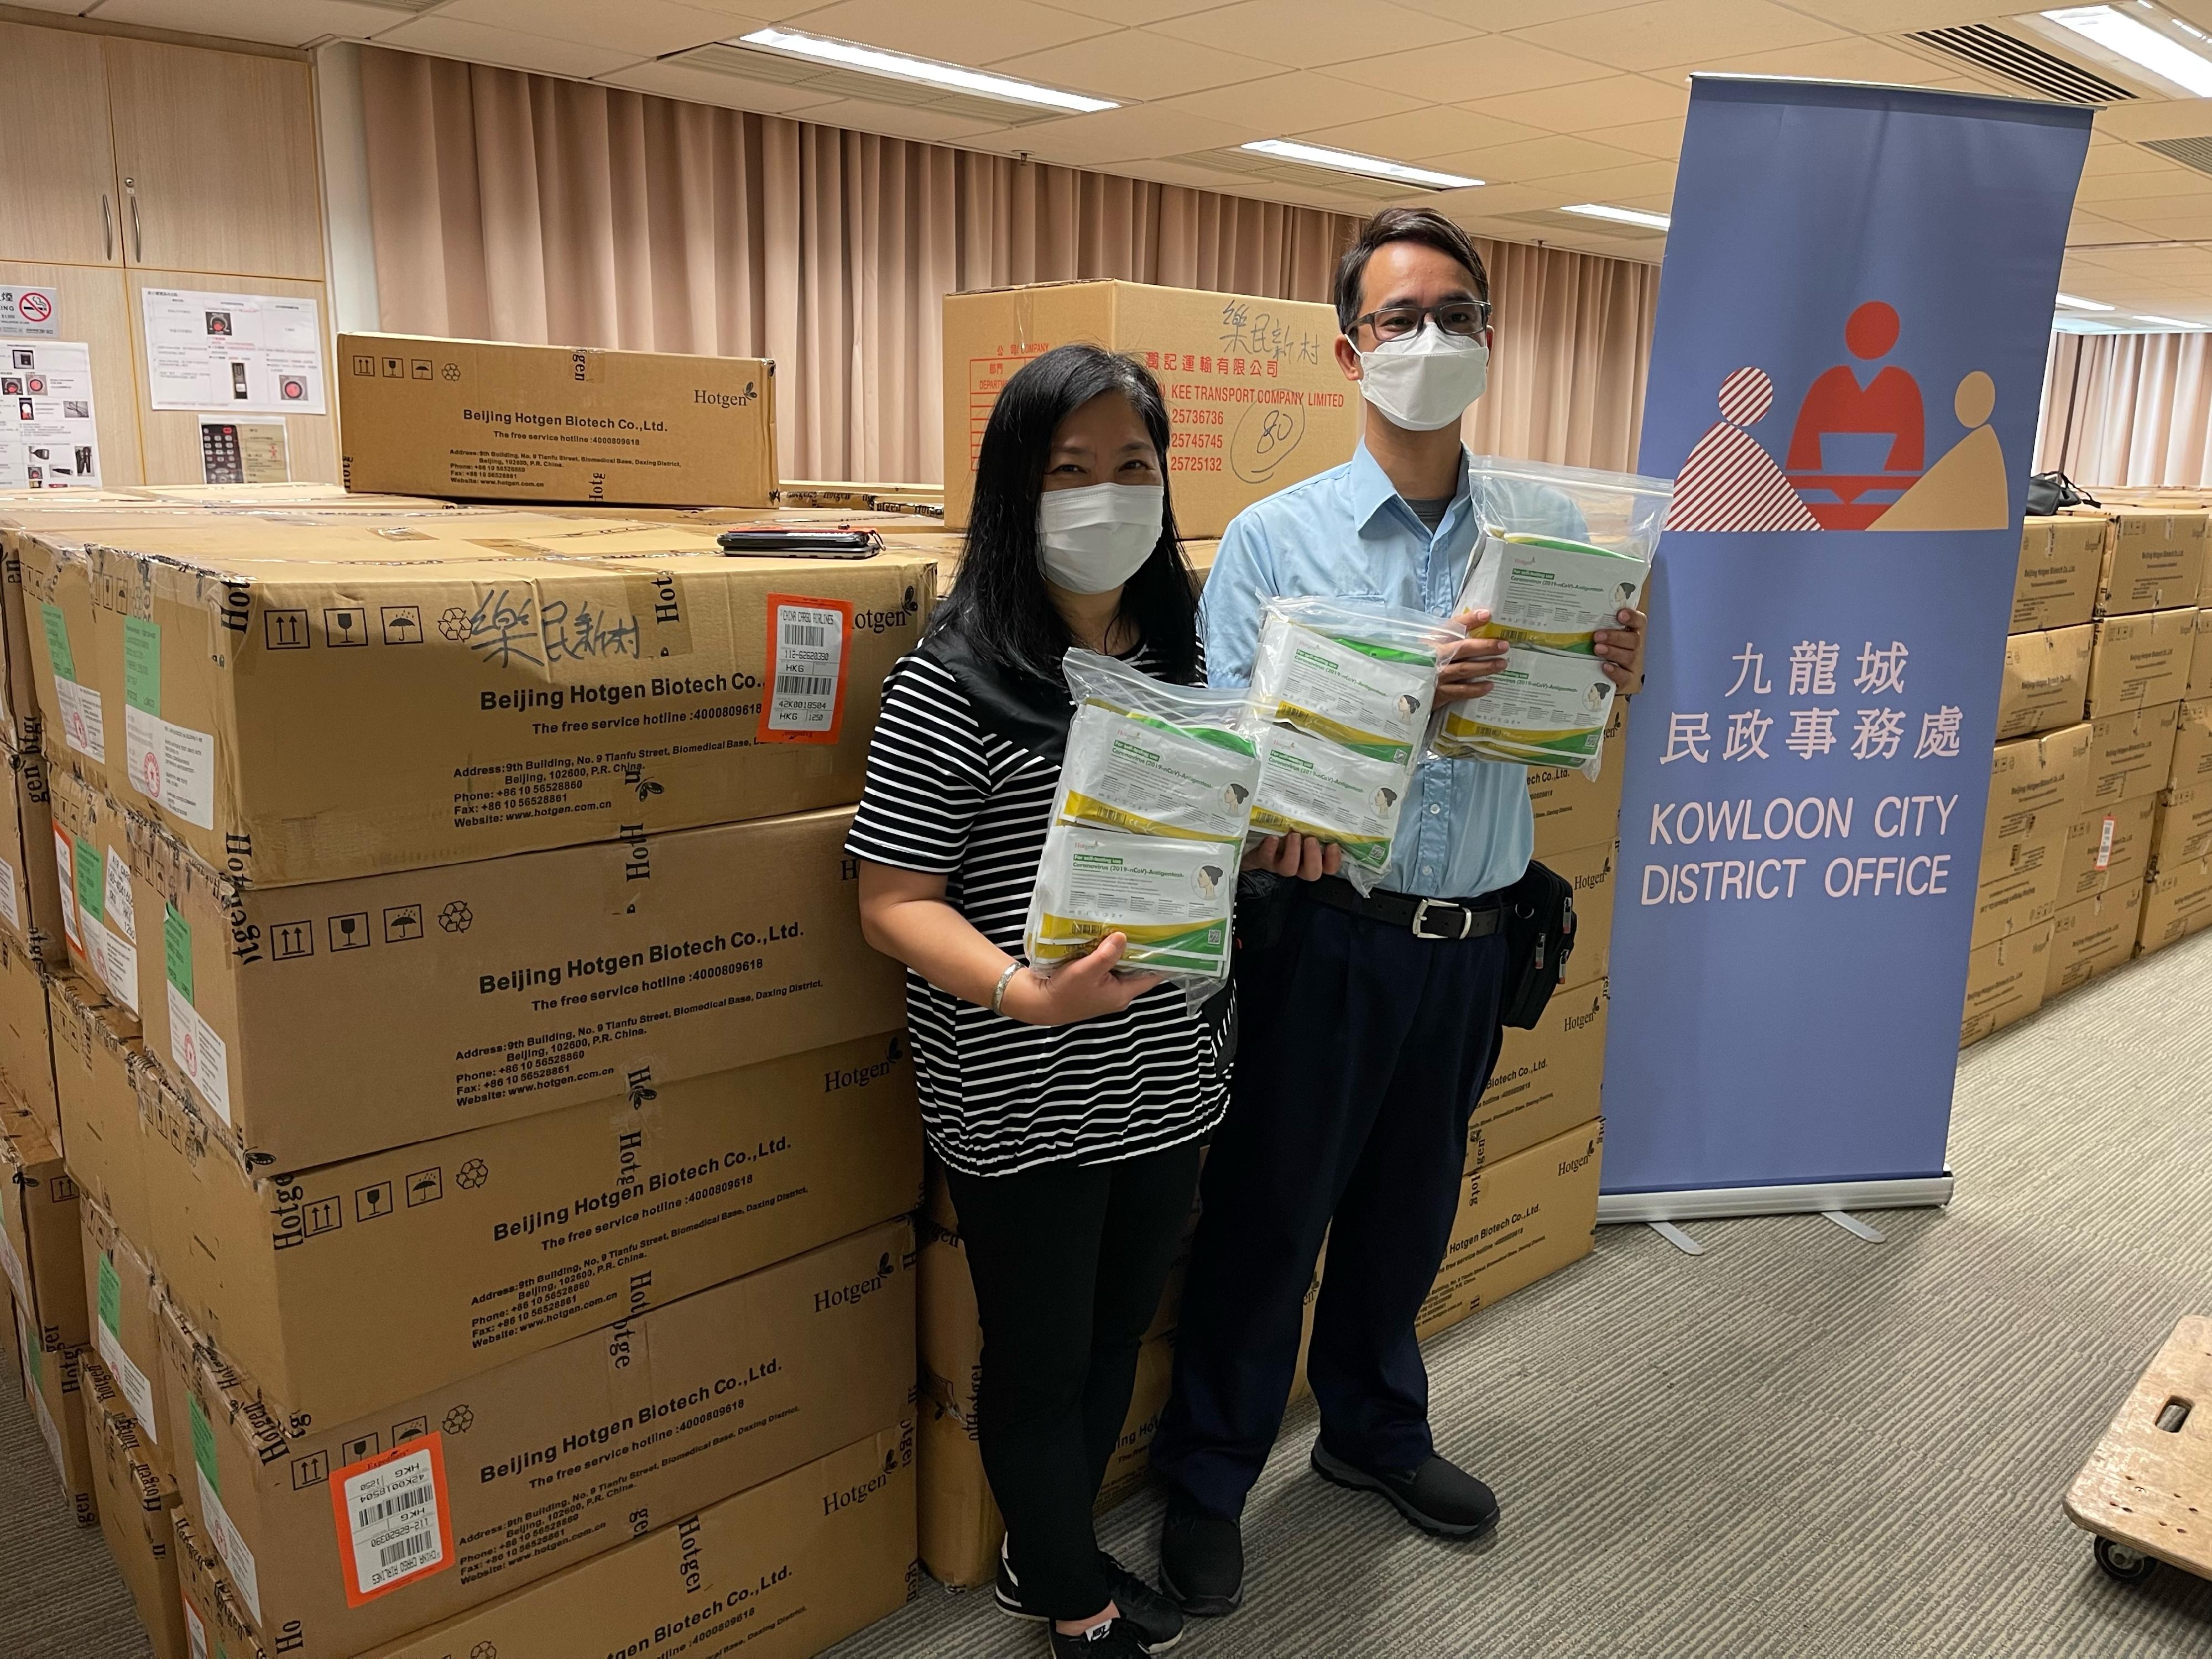 The Kowloon City District Office today (April 23)  distributed COVID-19 rapid test kits to households, cleansing workers and property management staff living and working in Lok Man Sun Chuen for voluntary testing through the property management company.